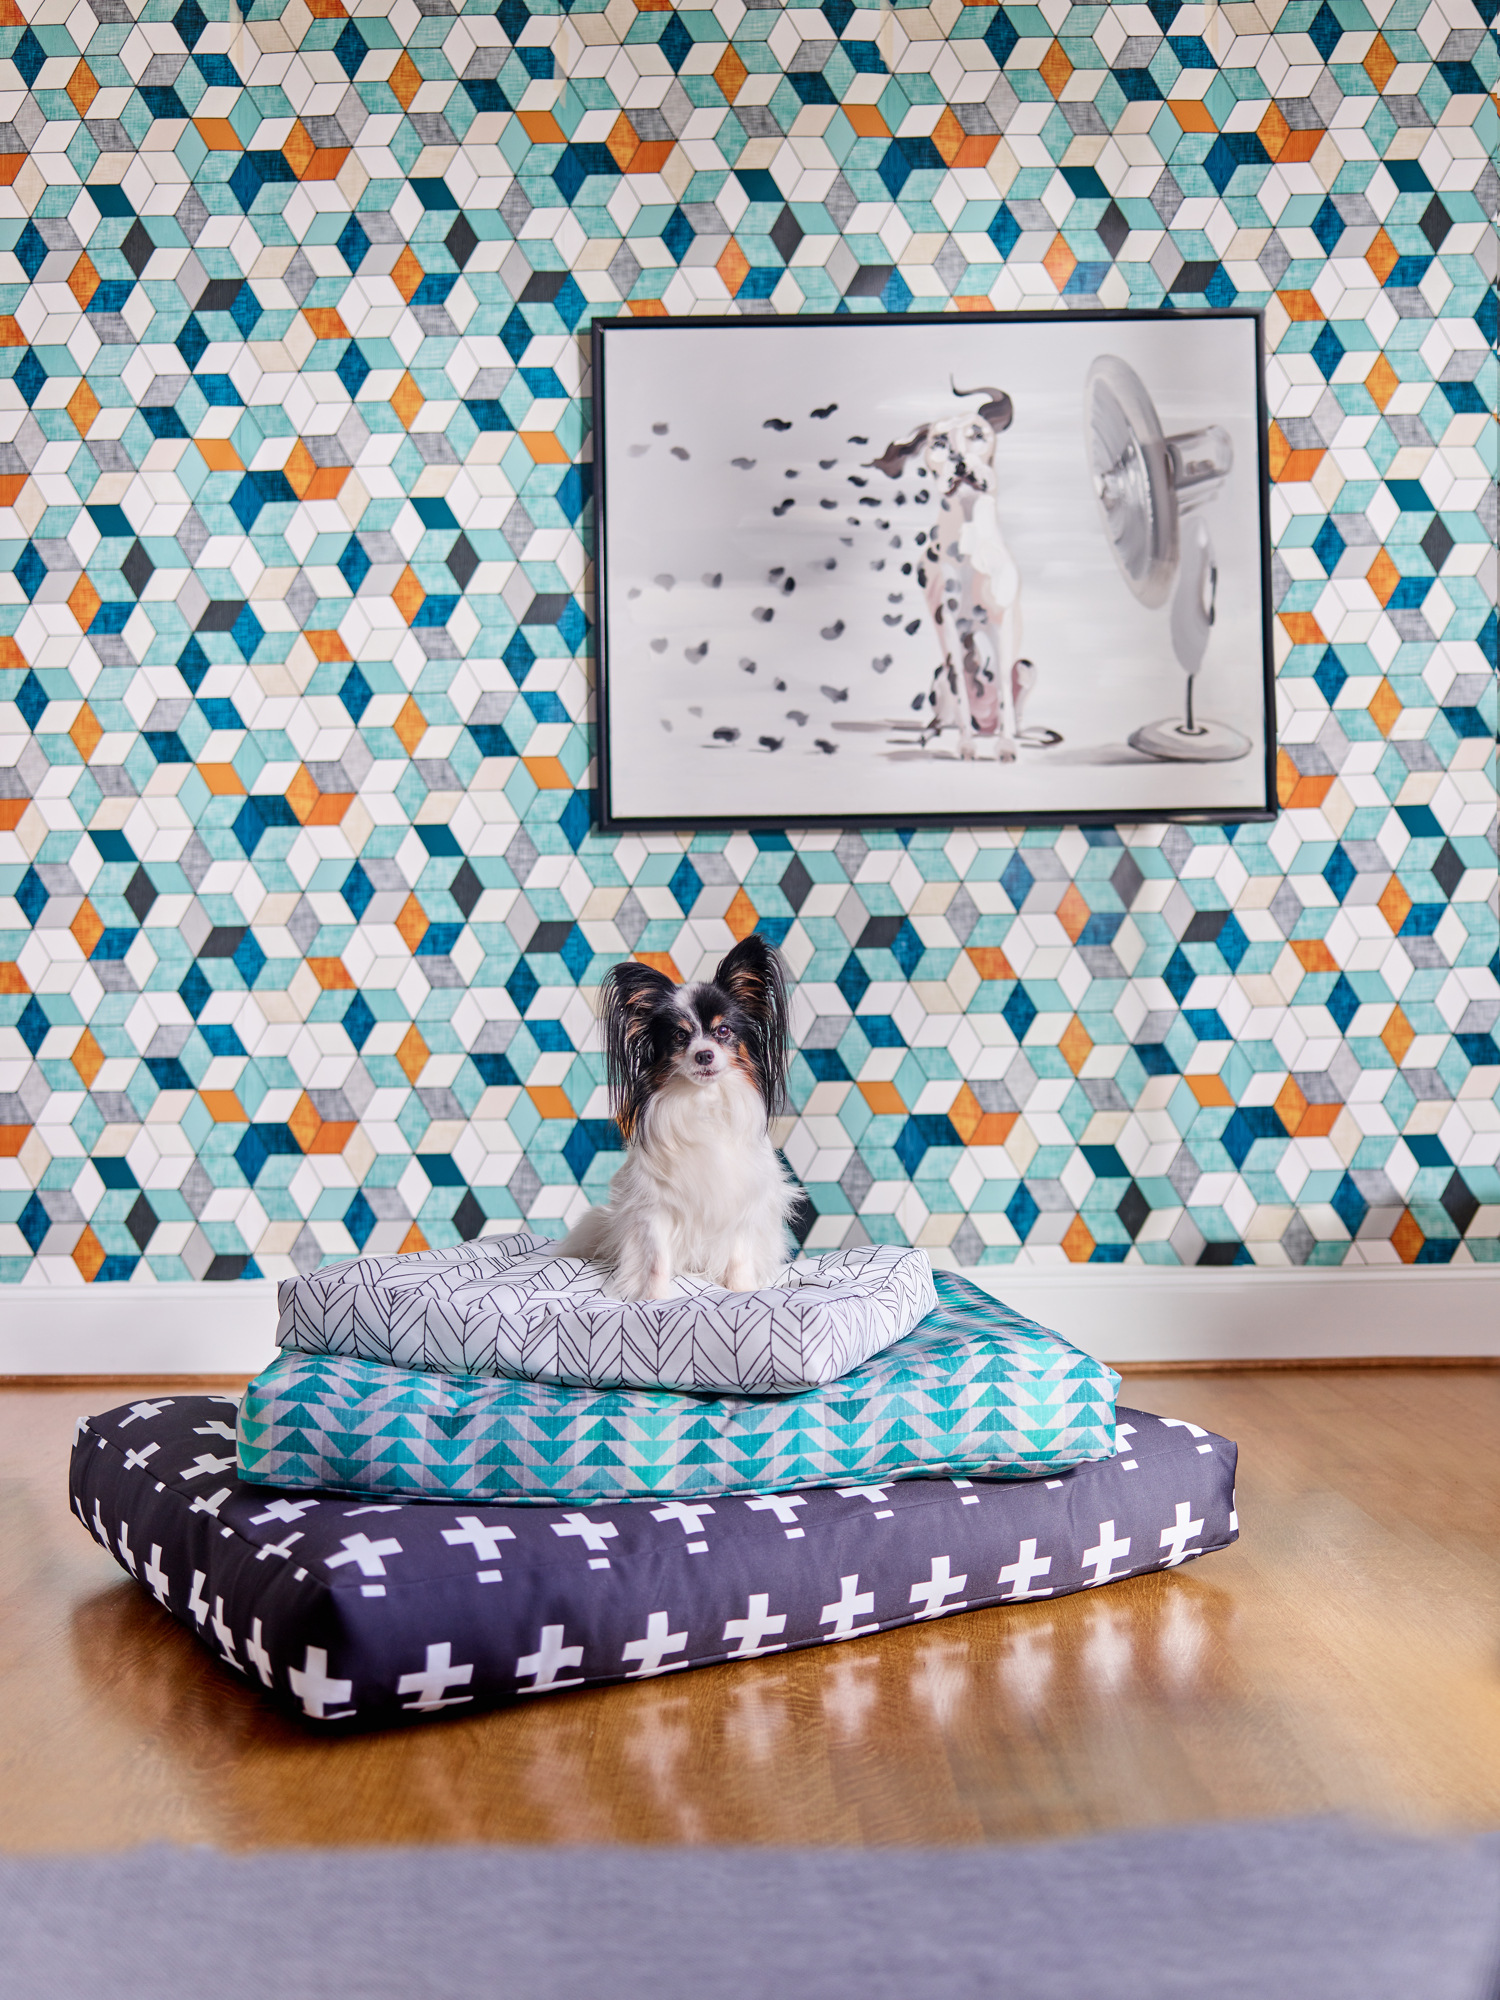 DIY dog bed: Pup on a throne of dog beds | The Spoonflower Blog